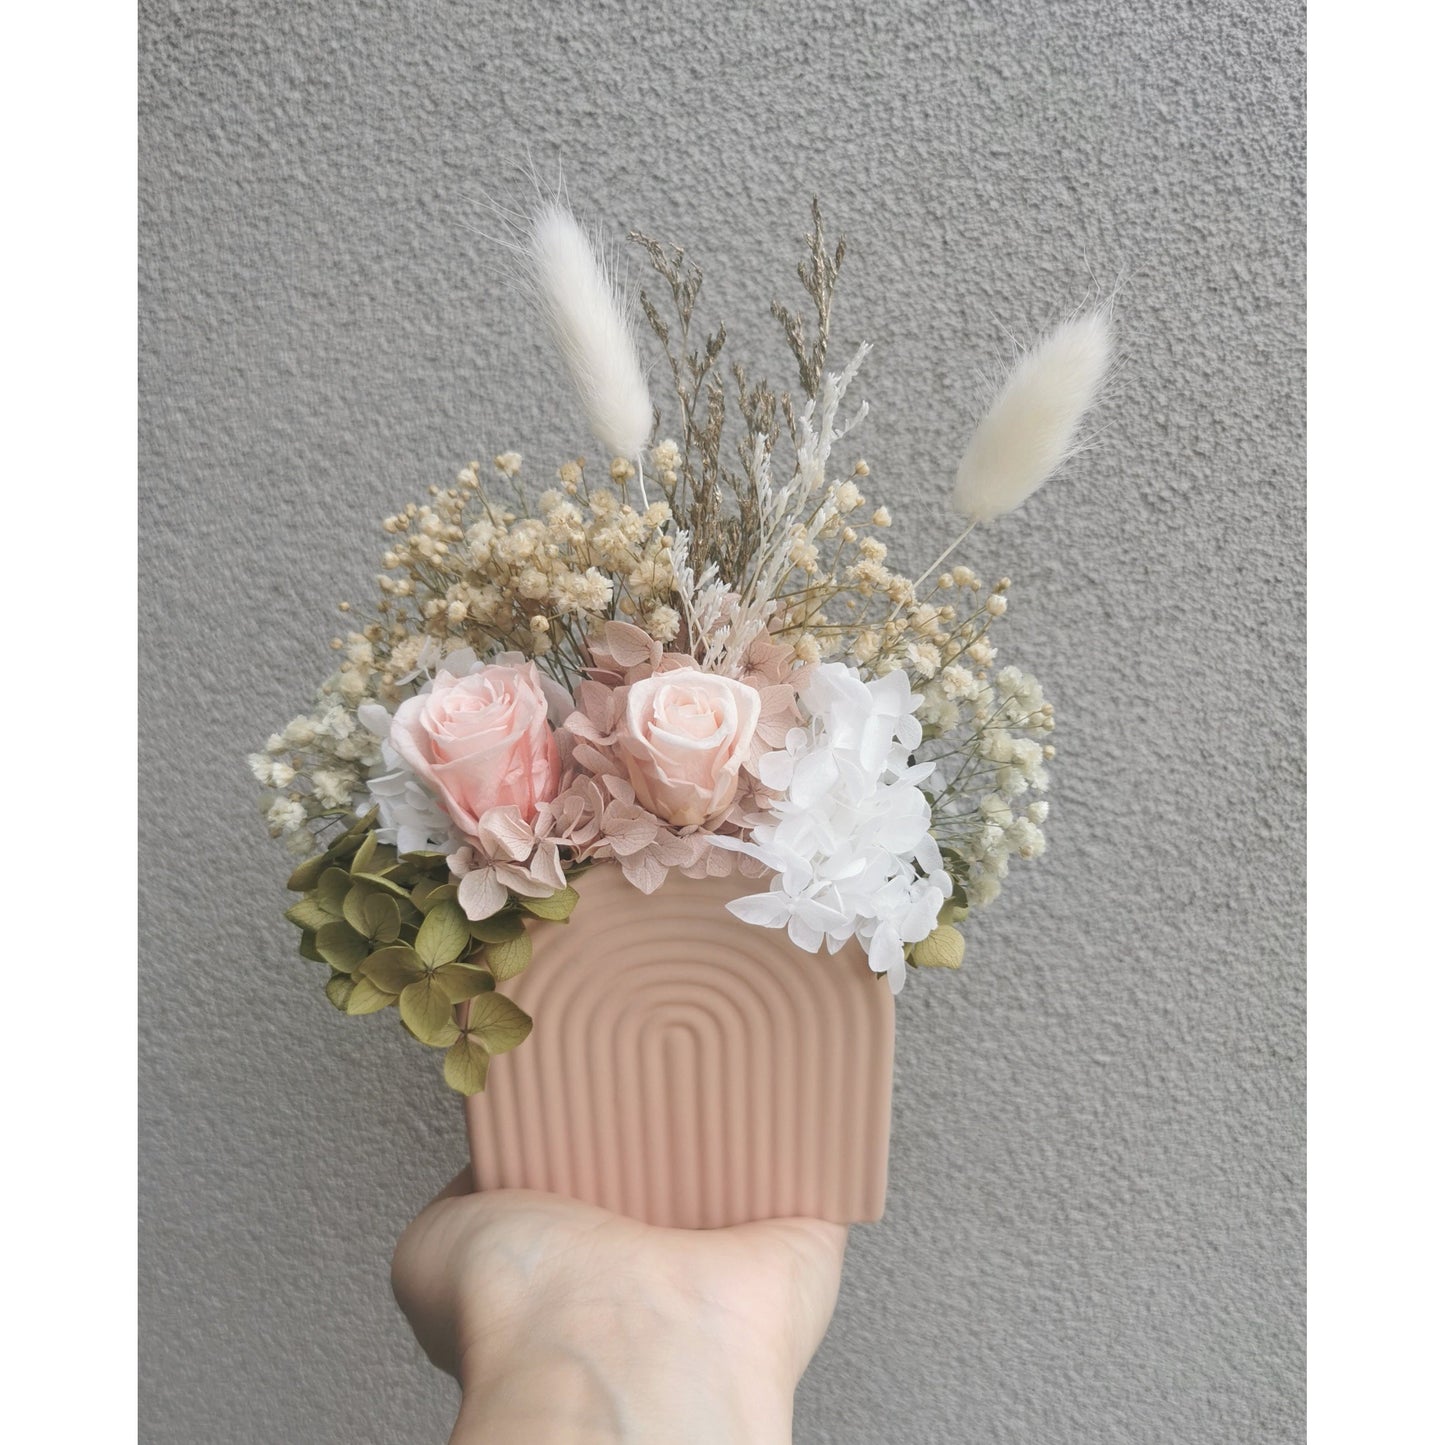 Dried & preserved flower arrangement featuring mini pink roses and pink, green & white dried flowers in a mini pink arch vase. Photo shows arrangement being held by hand in front of a blank wall